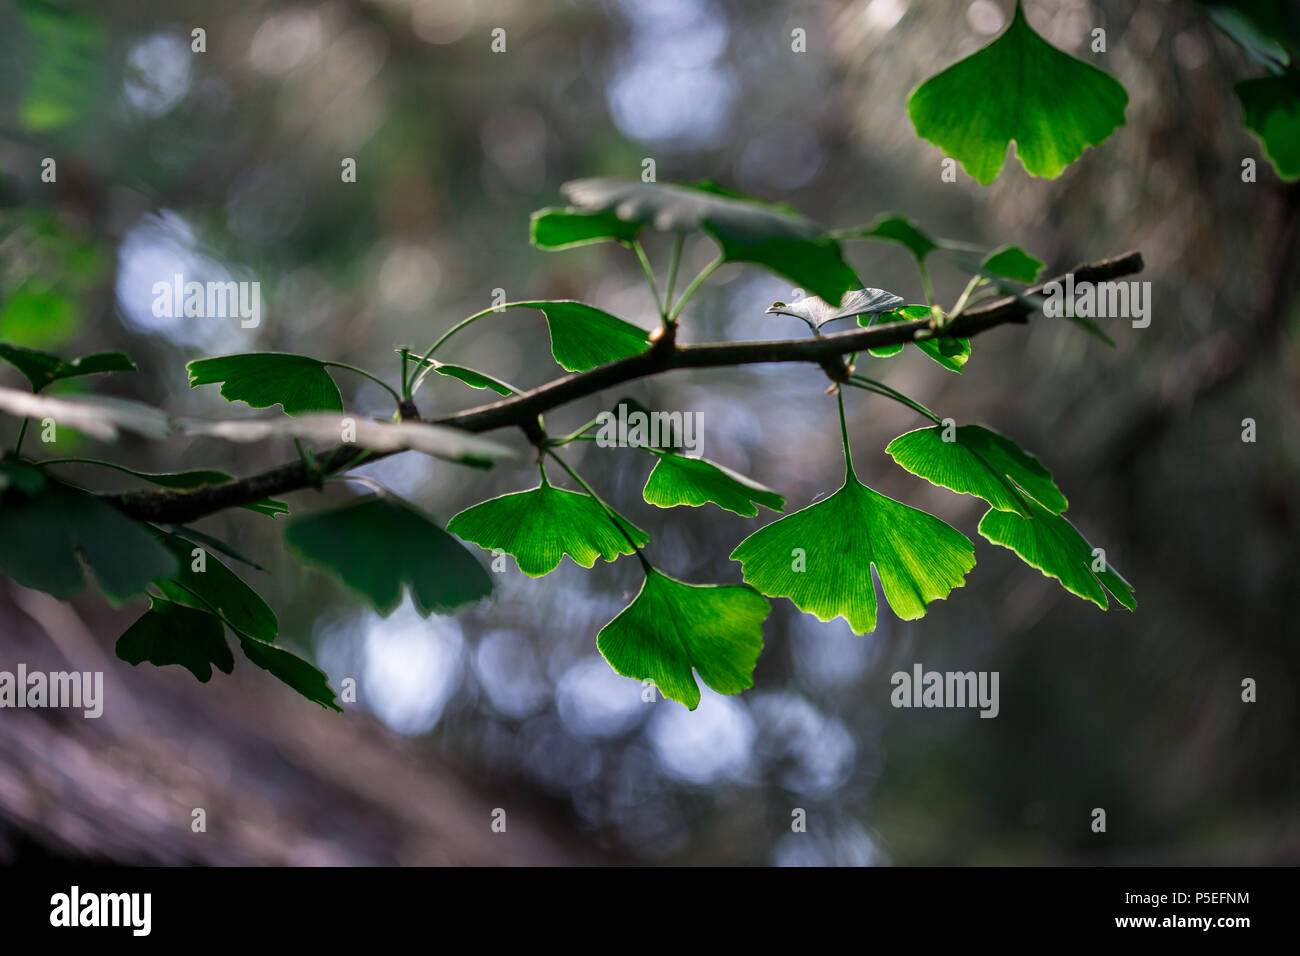 Branch of ginkgo biloba with young leaves against blur background Stock Photo